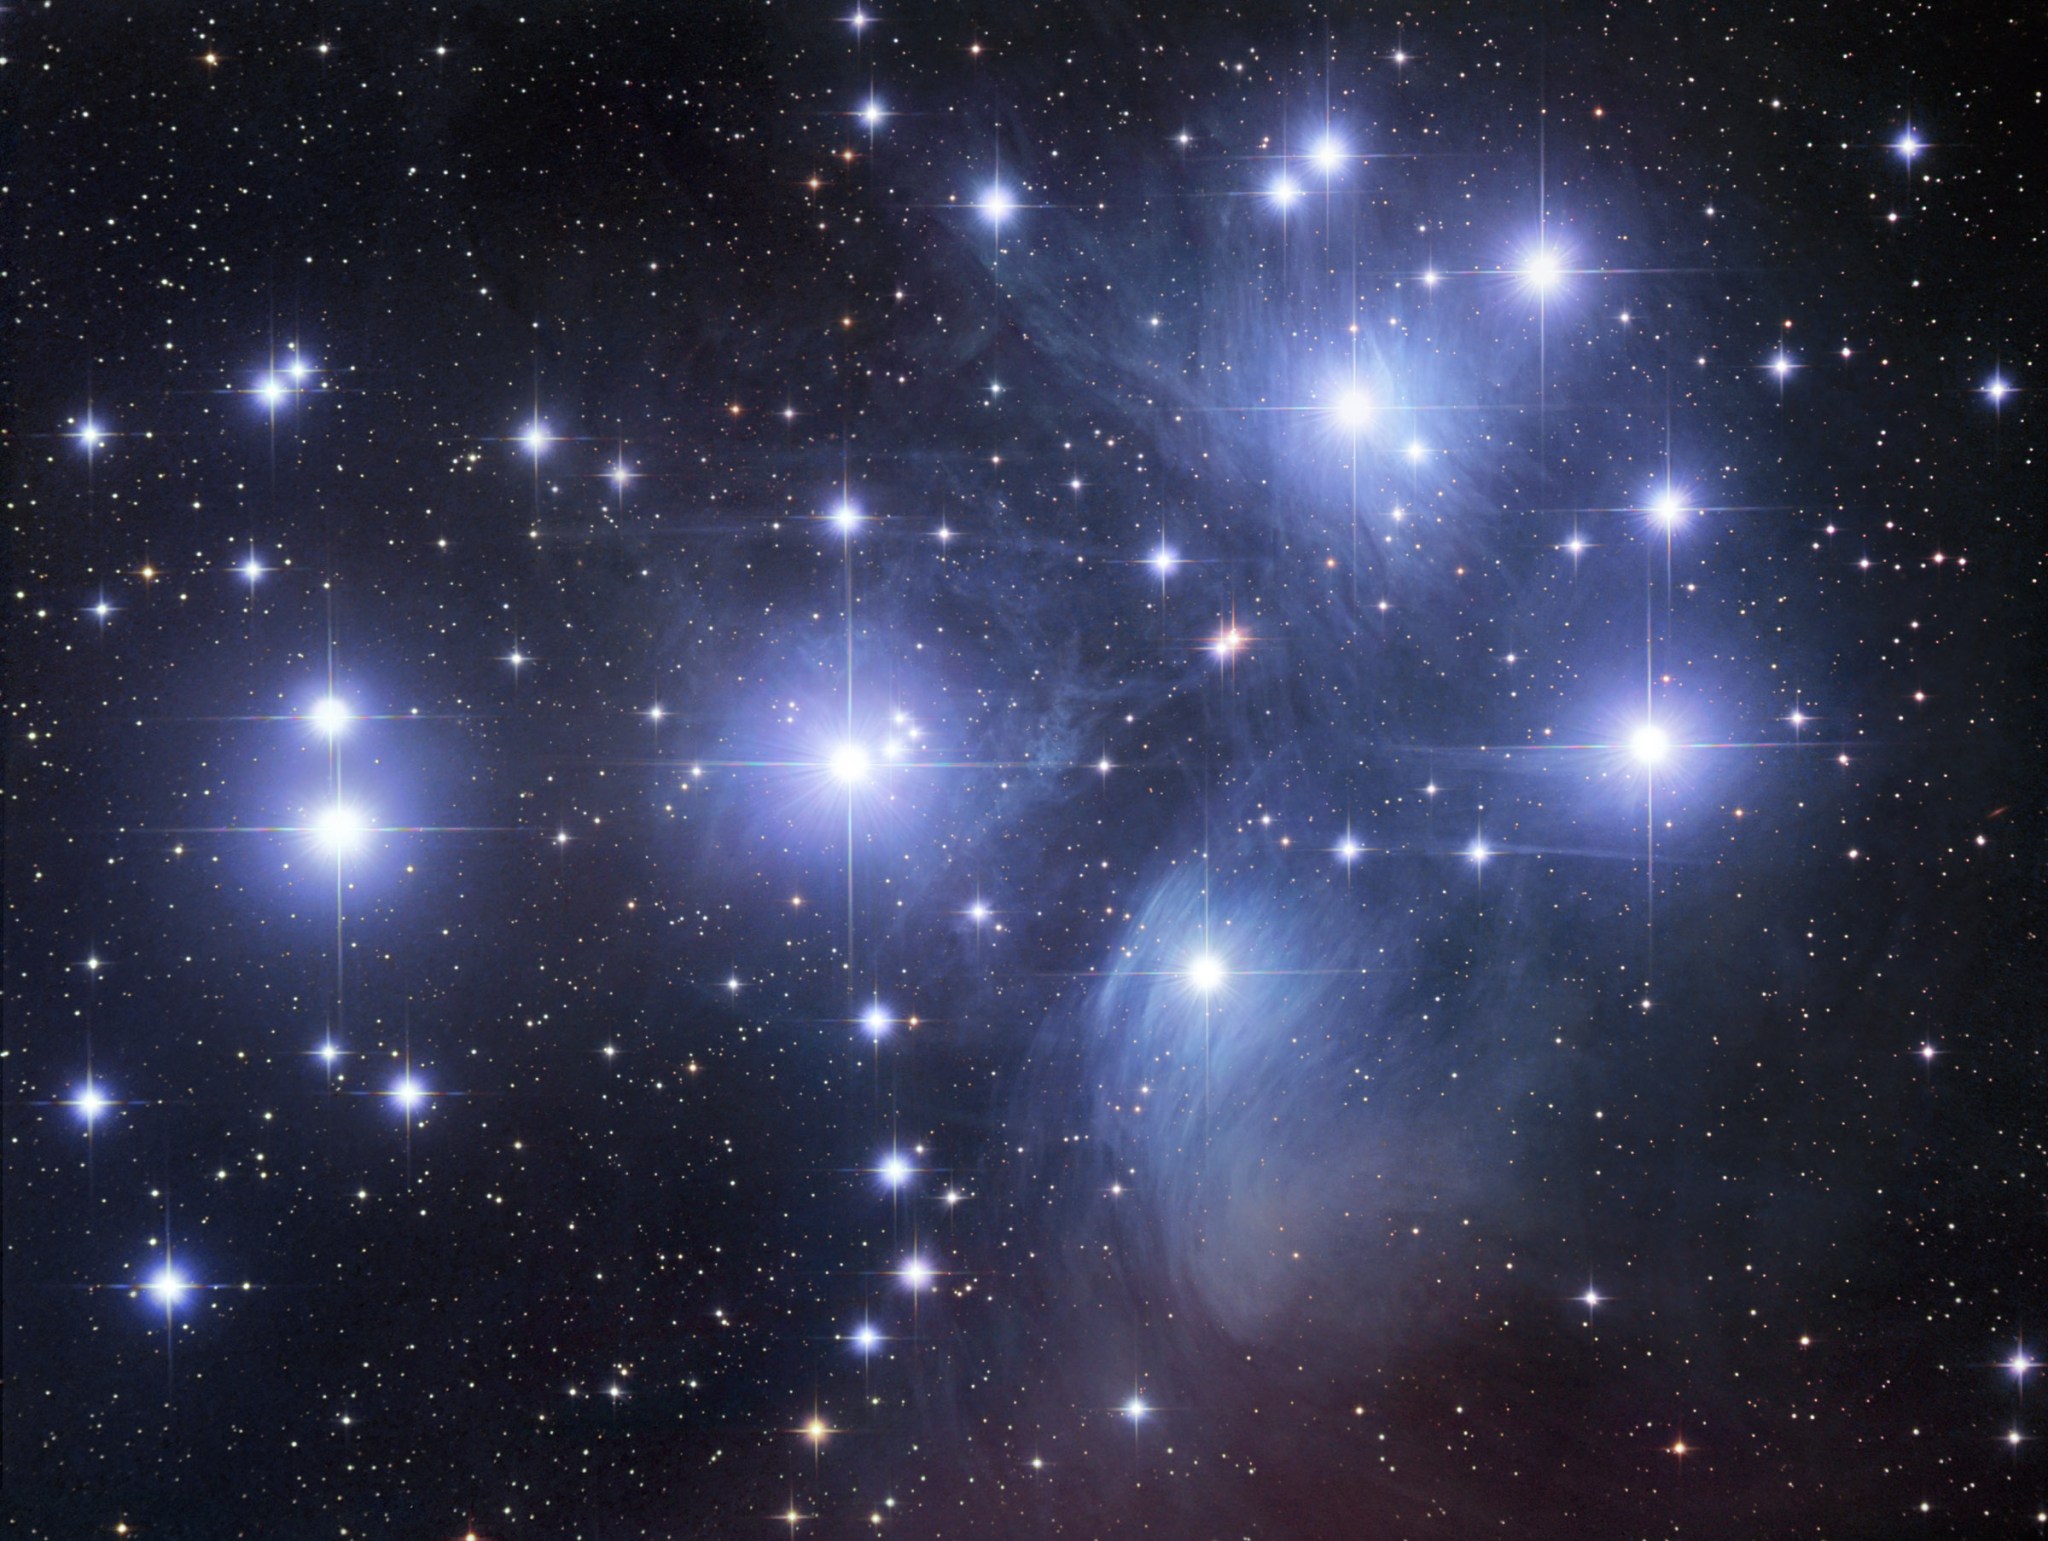 The Pleiades star cluster, shown as a large cluster of lights on a starry background.